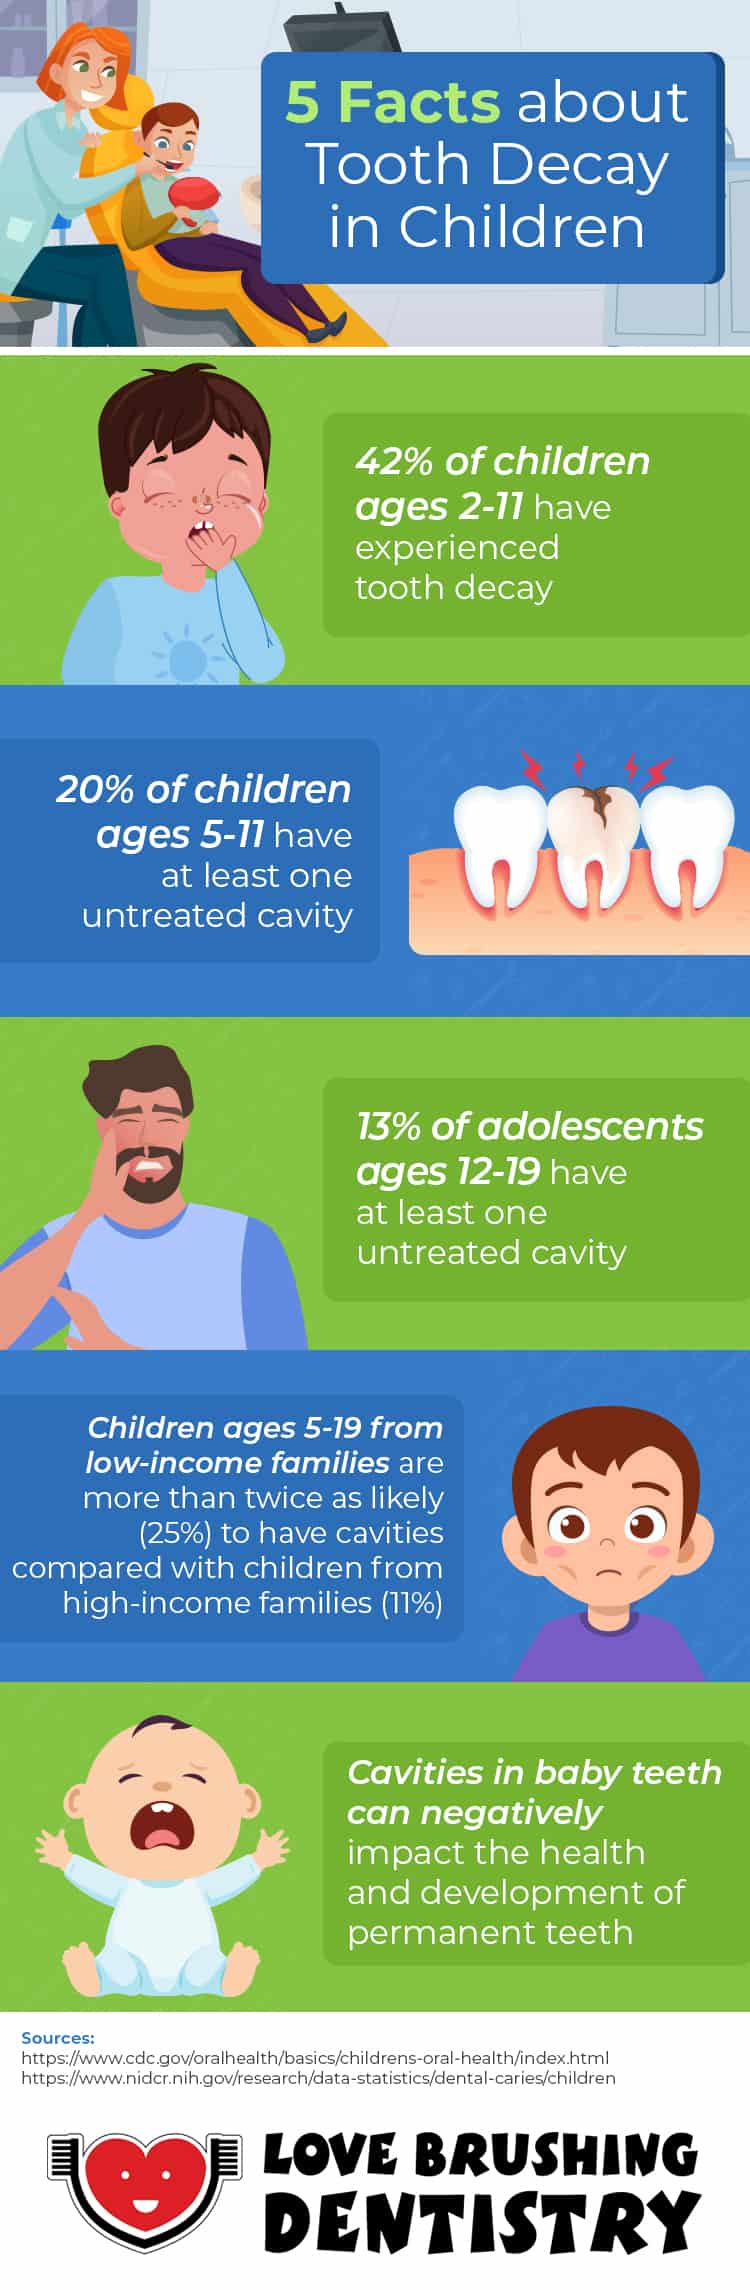 infographic highlighting 5 facts about tooth decay in children